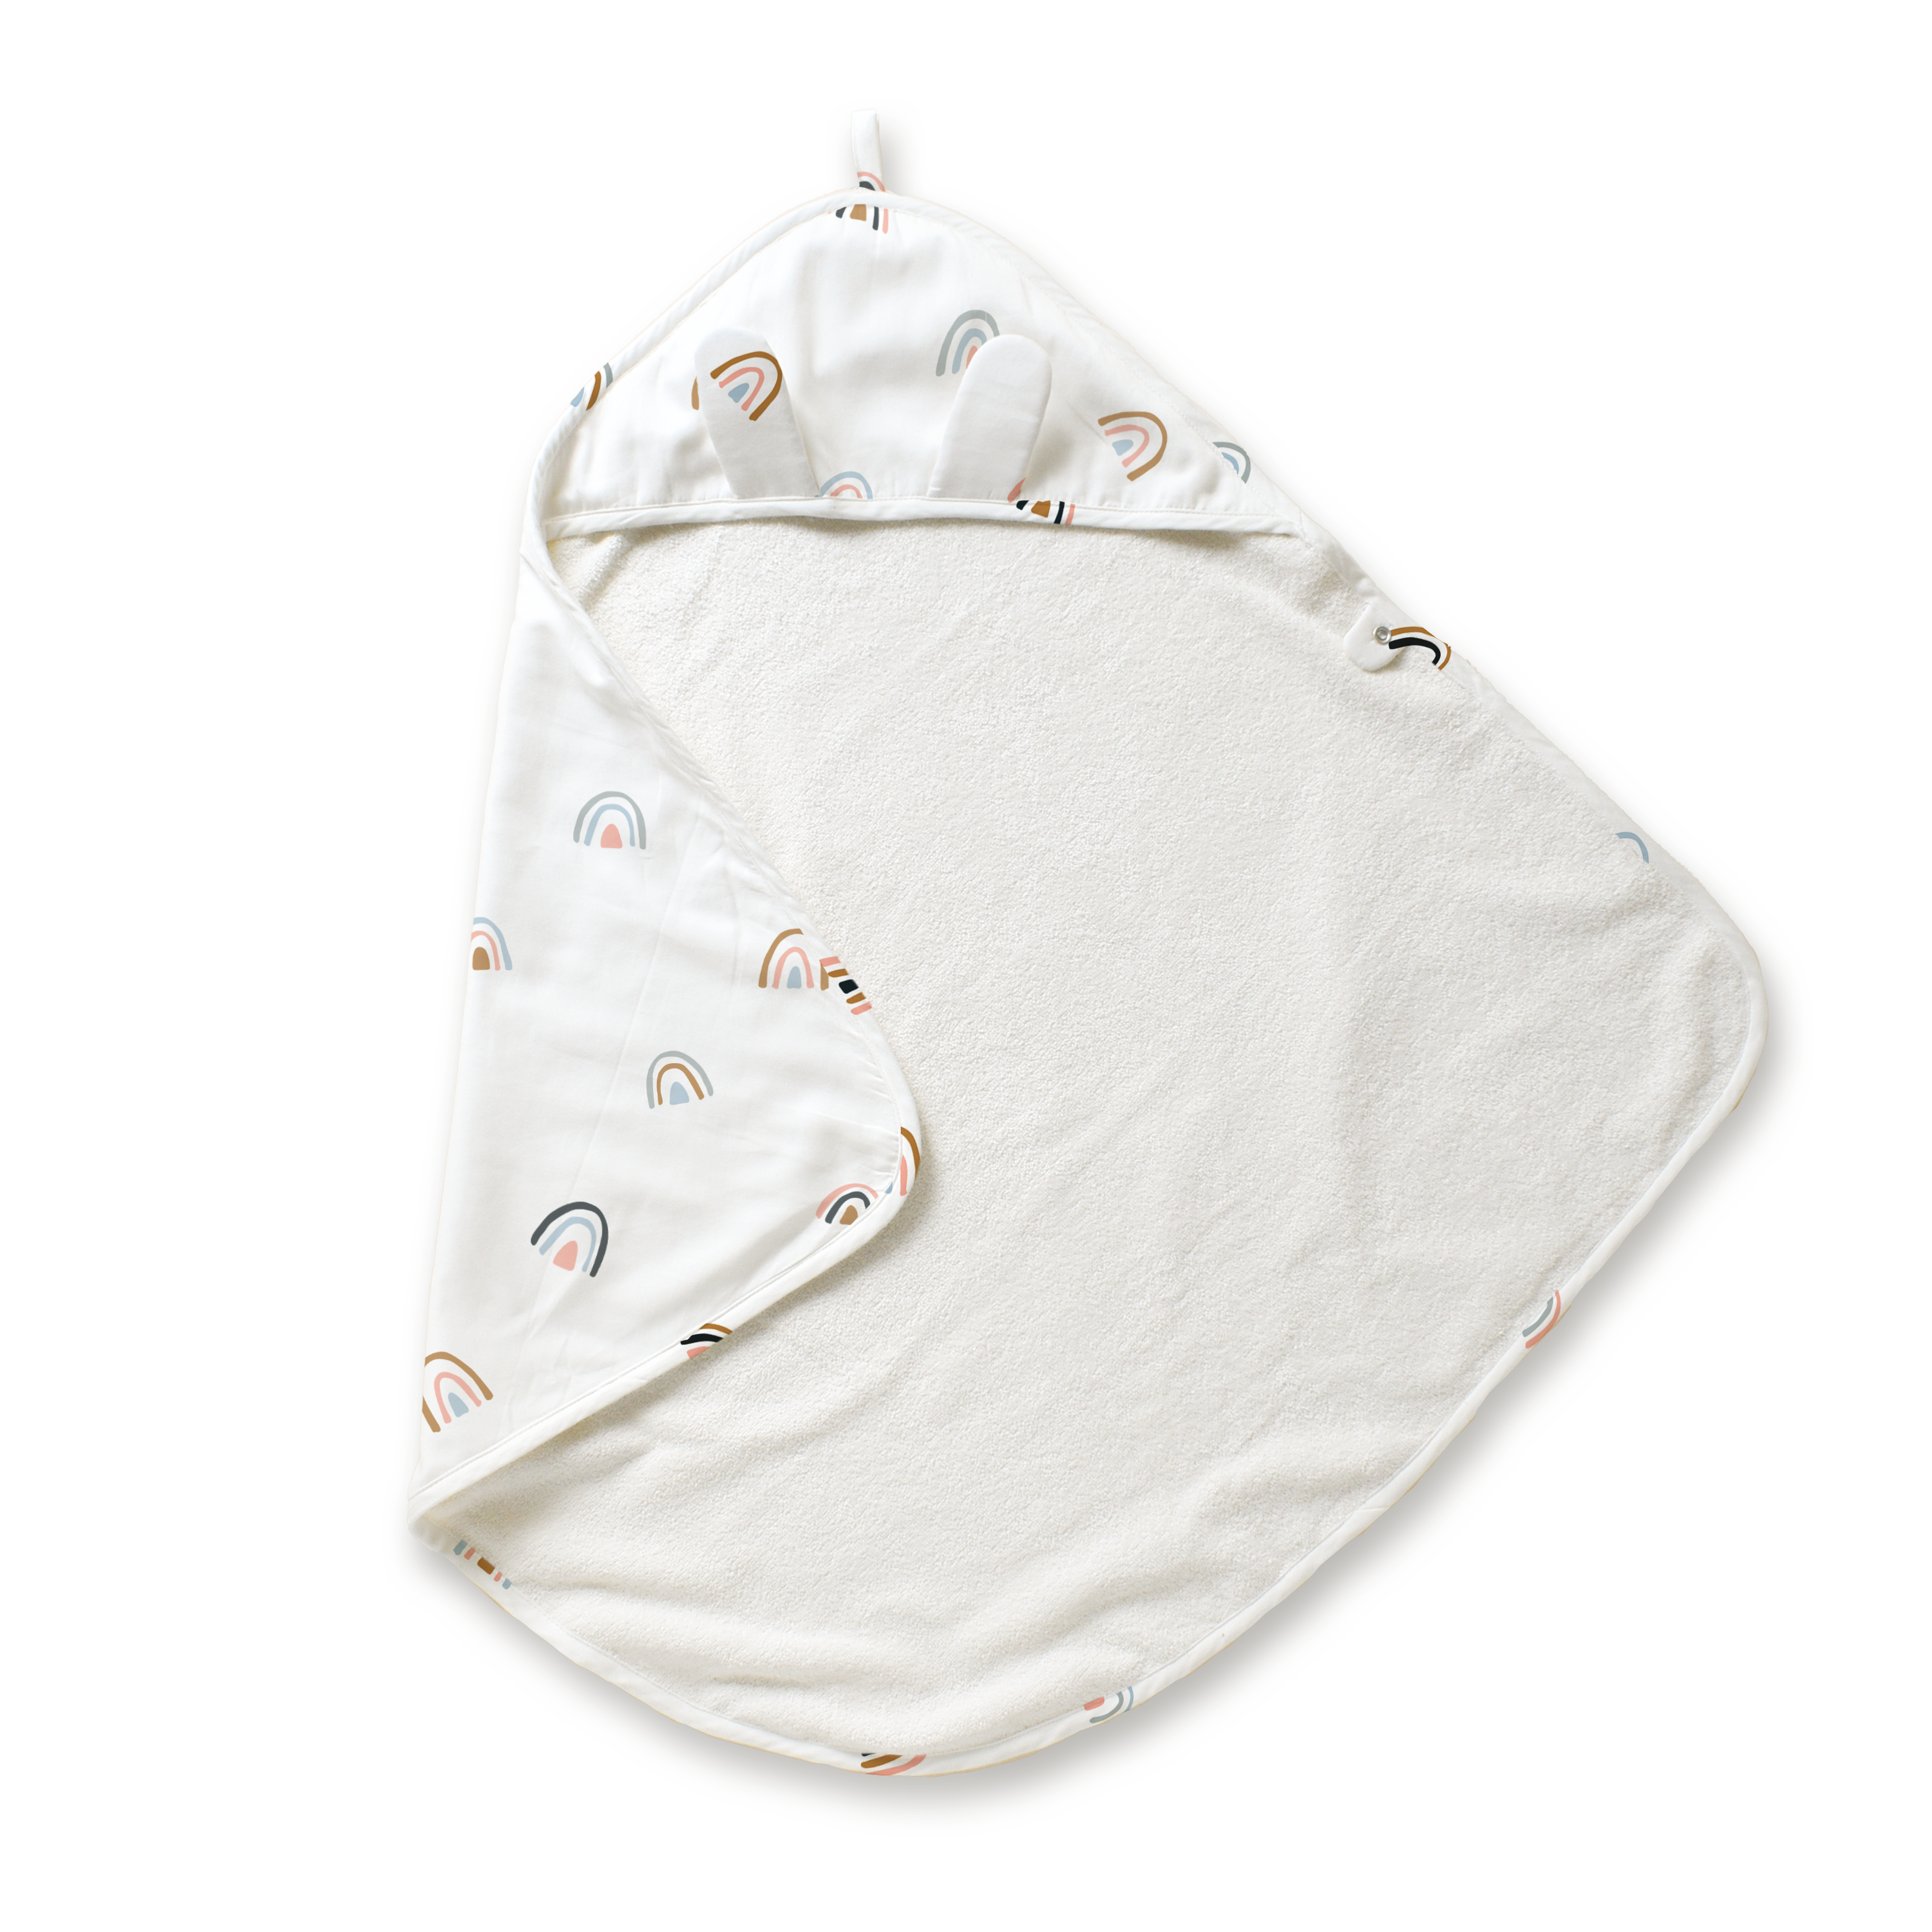 A baby's Makemake Organics Organic Cotton Hooded Baby Towel & Poncho - Rainbow, shaped like a triangle with a hood at one corner. the interior hood lining has a colorful rainbow pattern. the towel is set against a white background.